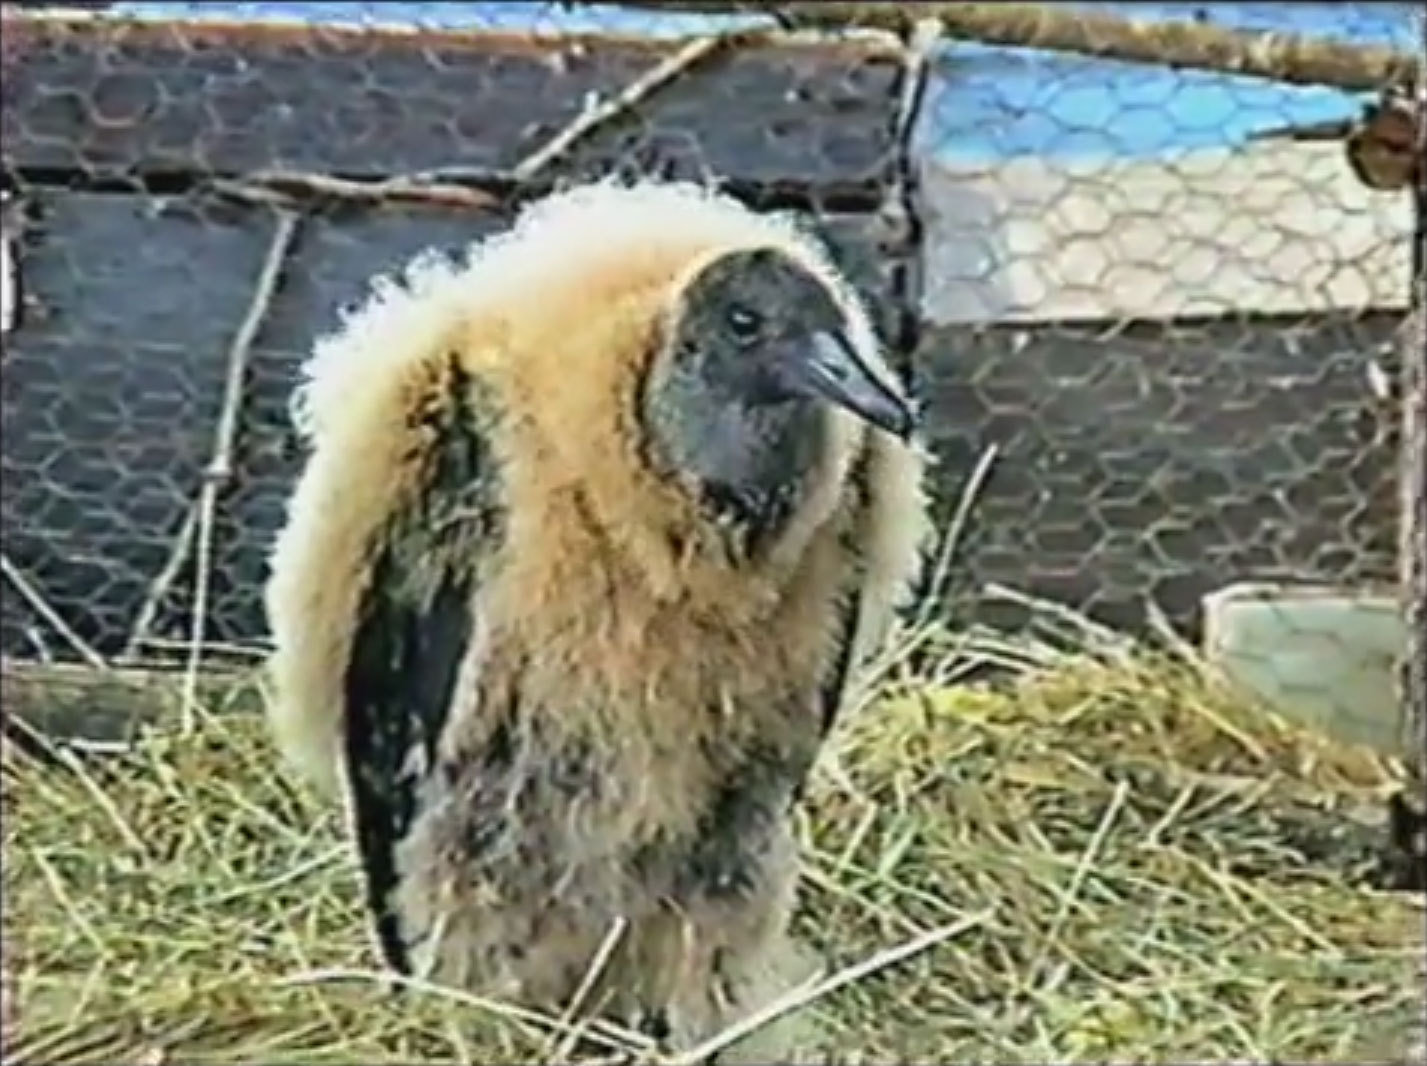 A vulture for sale at Collinsville Trade Day.